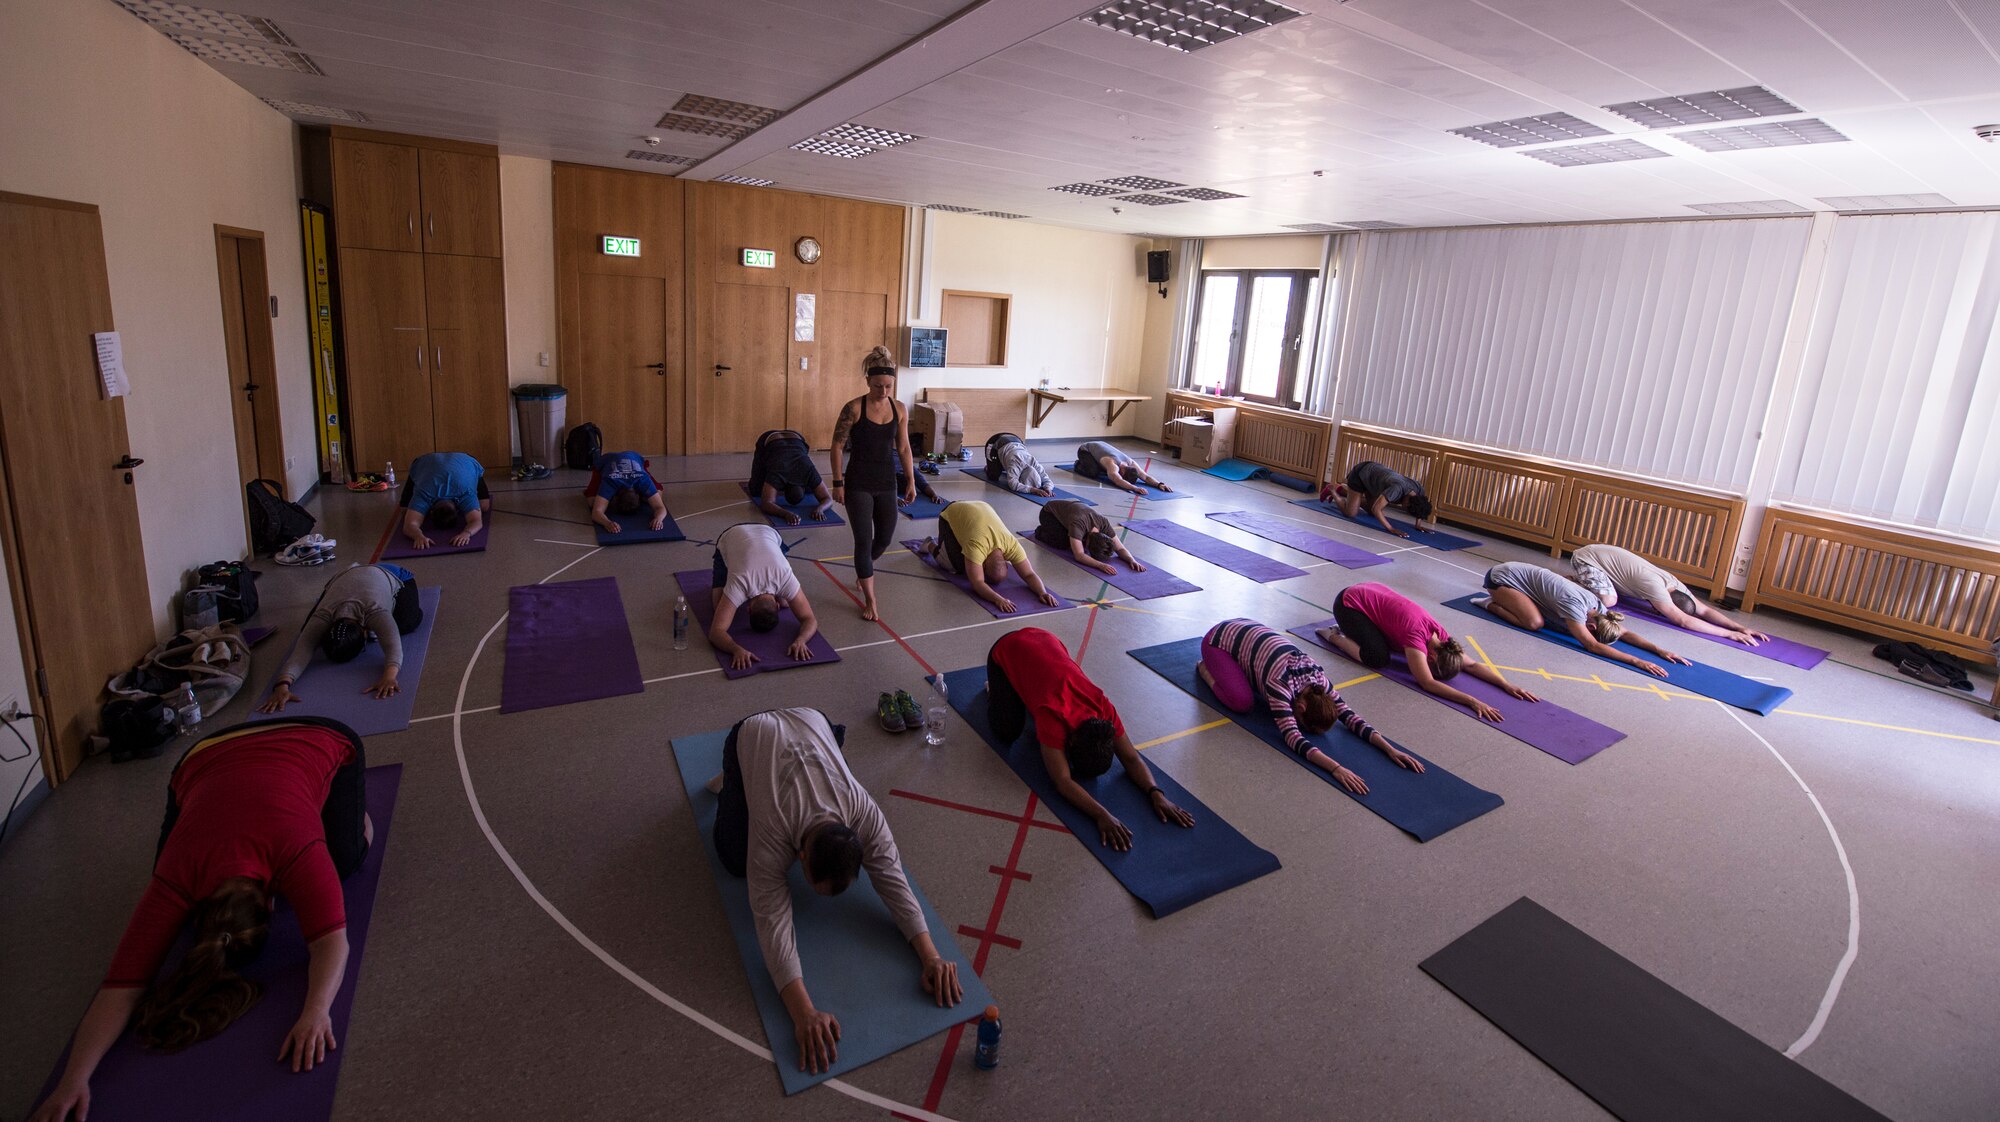 Mathea McKinley, a fitness instructor, leads a yoga and spirituality workshop in the base chapel on Spangdahlem Air Base, Germany, June 4, 2015, during the 52nd Fighter Wing’s Resiliency Day. The goal of the Comprehensive Airman Fitness initiative is to assist Airmen, civilians and family members to become resilient and better-equipped to deal with the challenges associated with military life. (U.S. Air Force photo by Staff Sgt. Christopher Ruano/Released)